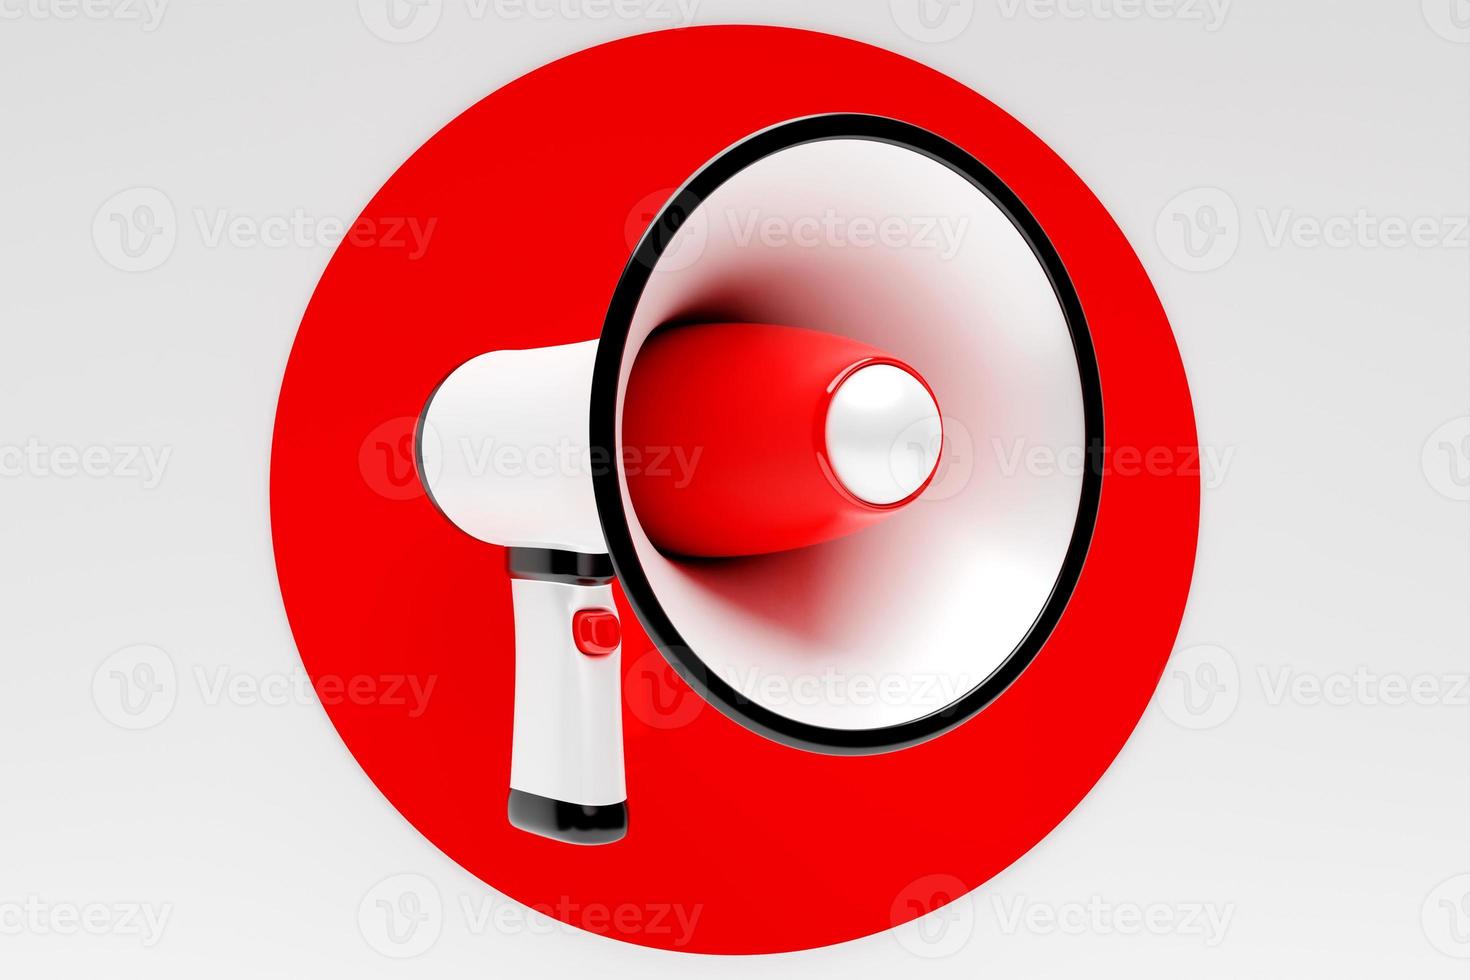 red cartoon glass loudspeaker on a  white  monochrome background. 3d illustration of a megaphone. Advertising symbol, promotion concept. photo